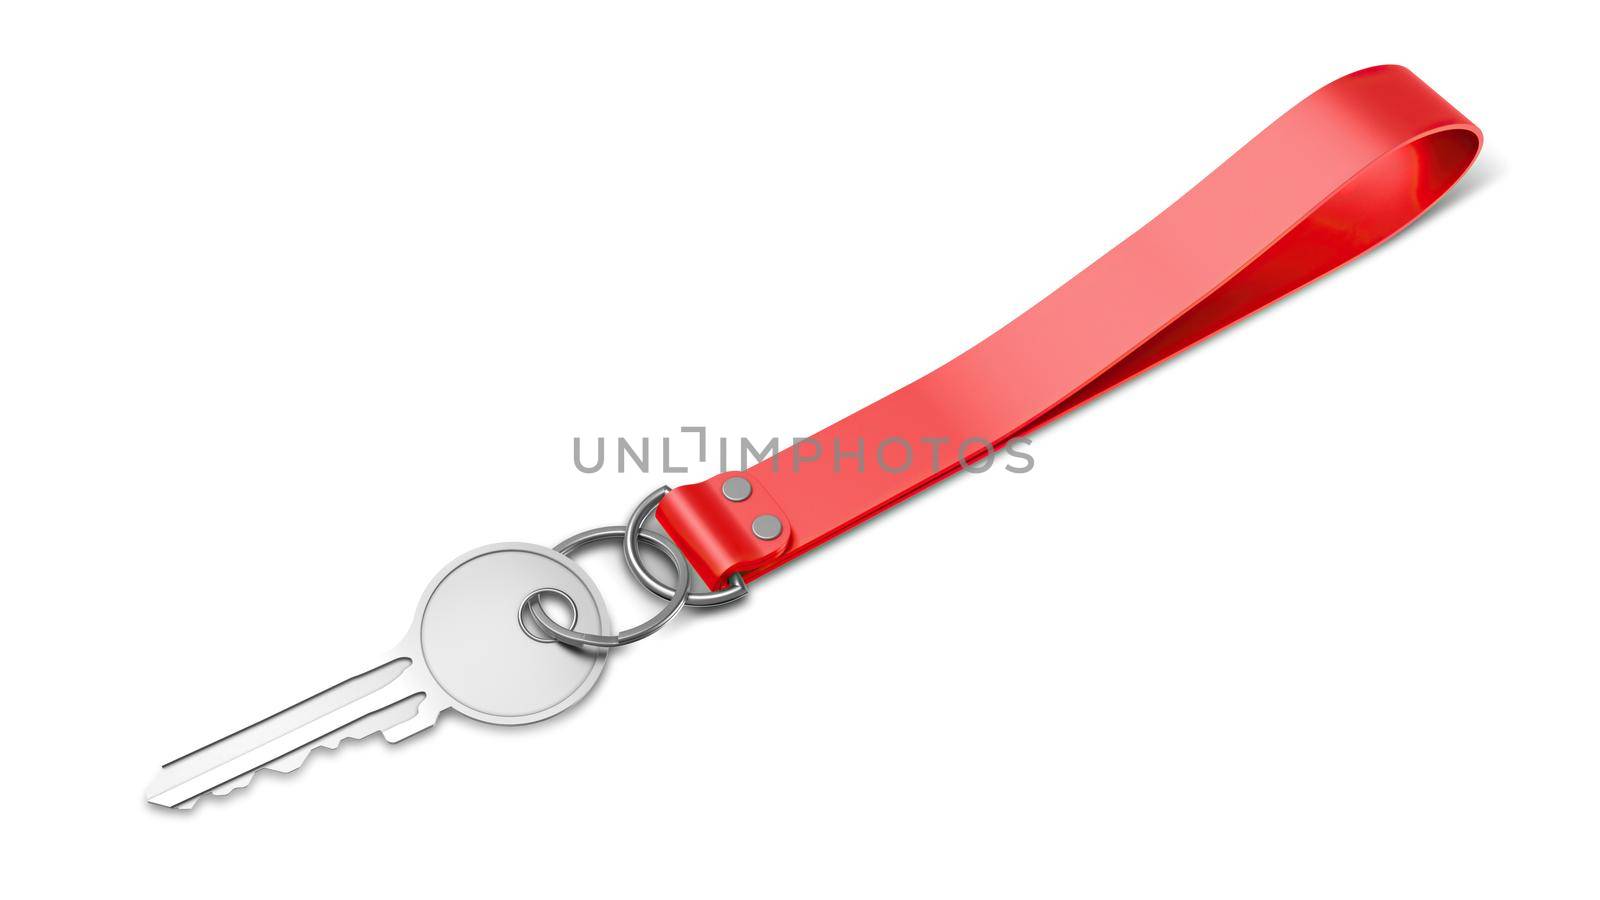 Plastic Keychain Mockup With Key Perspective View